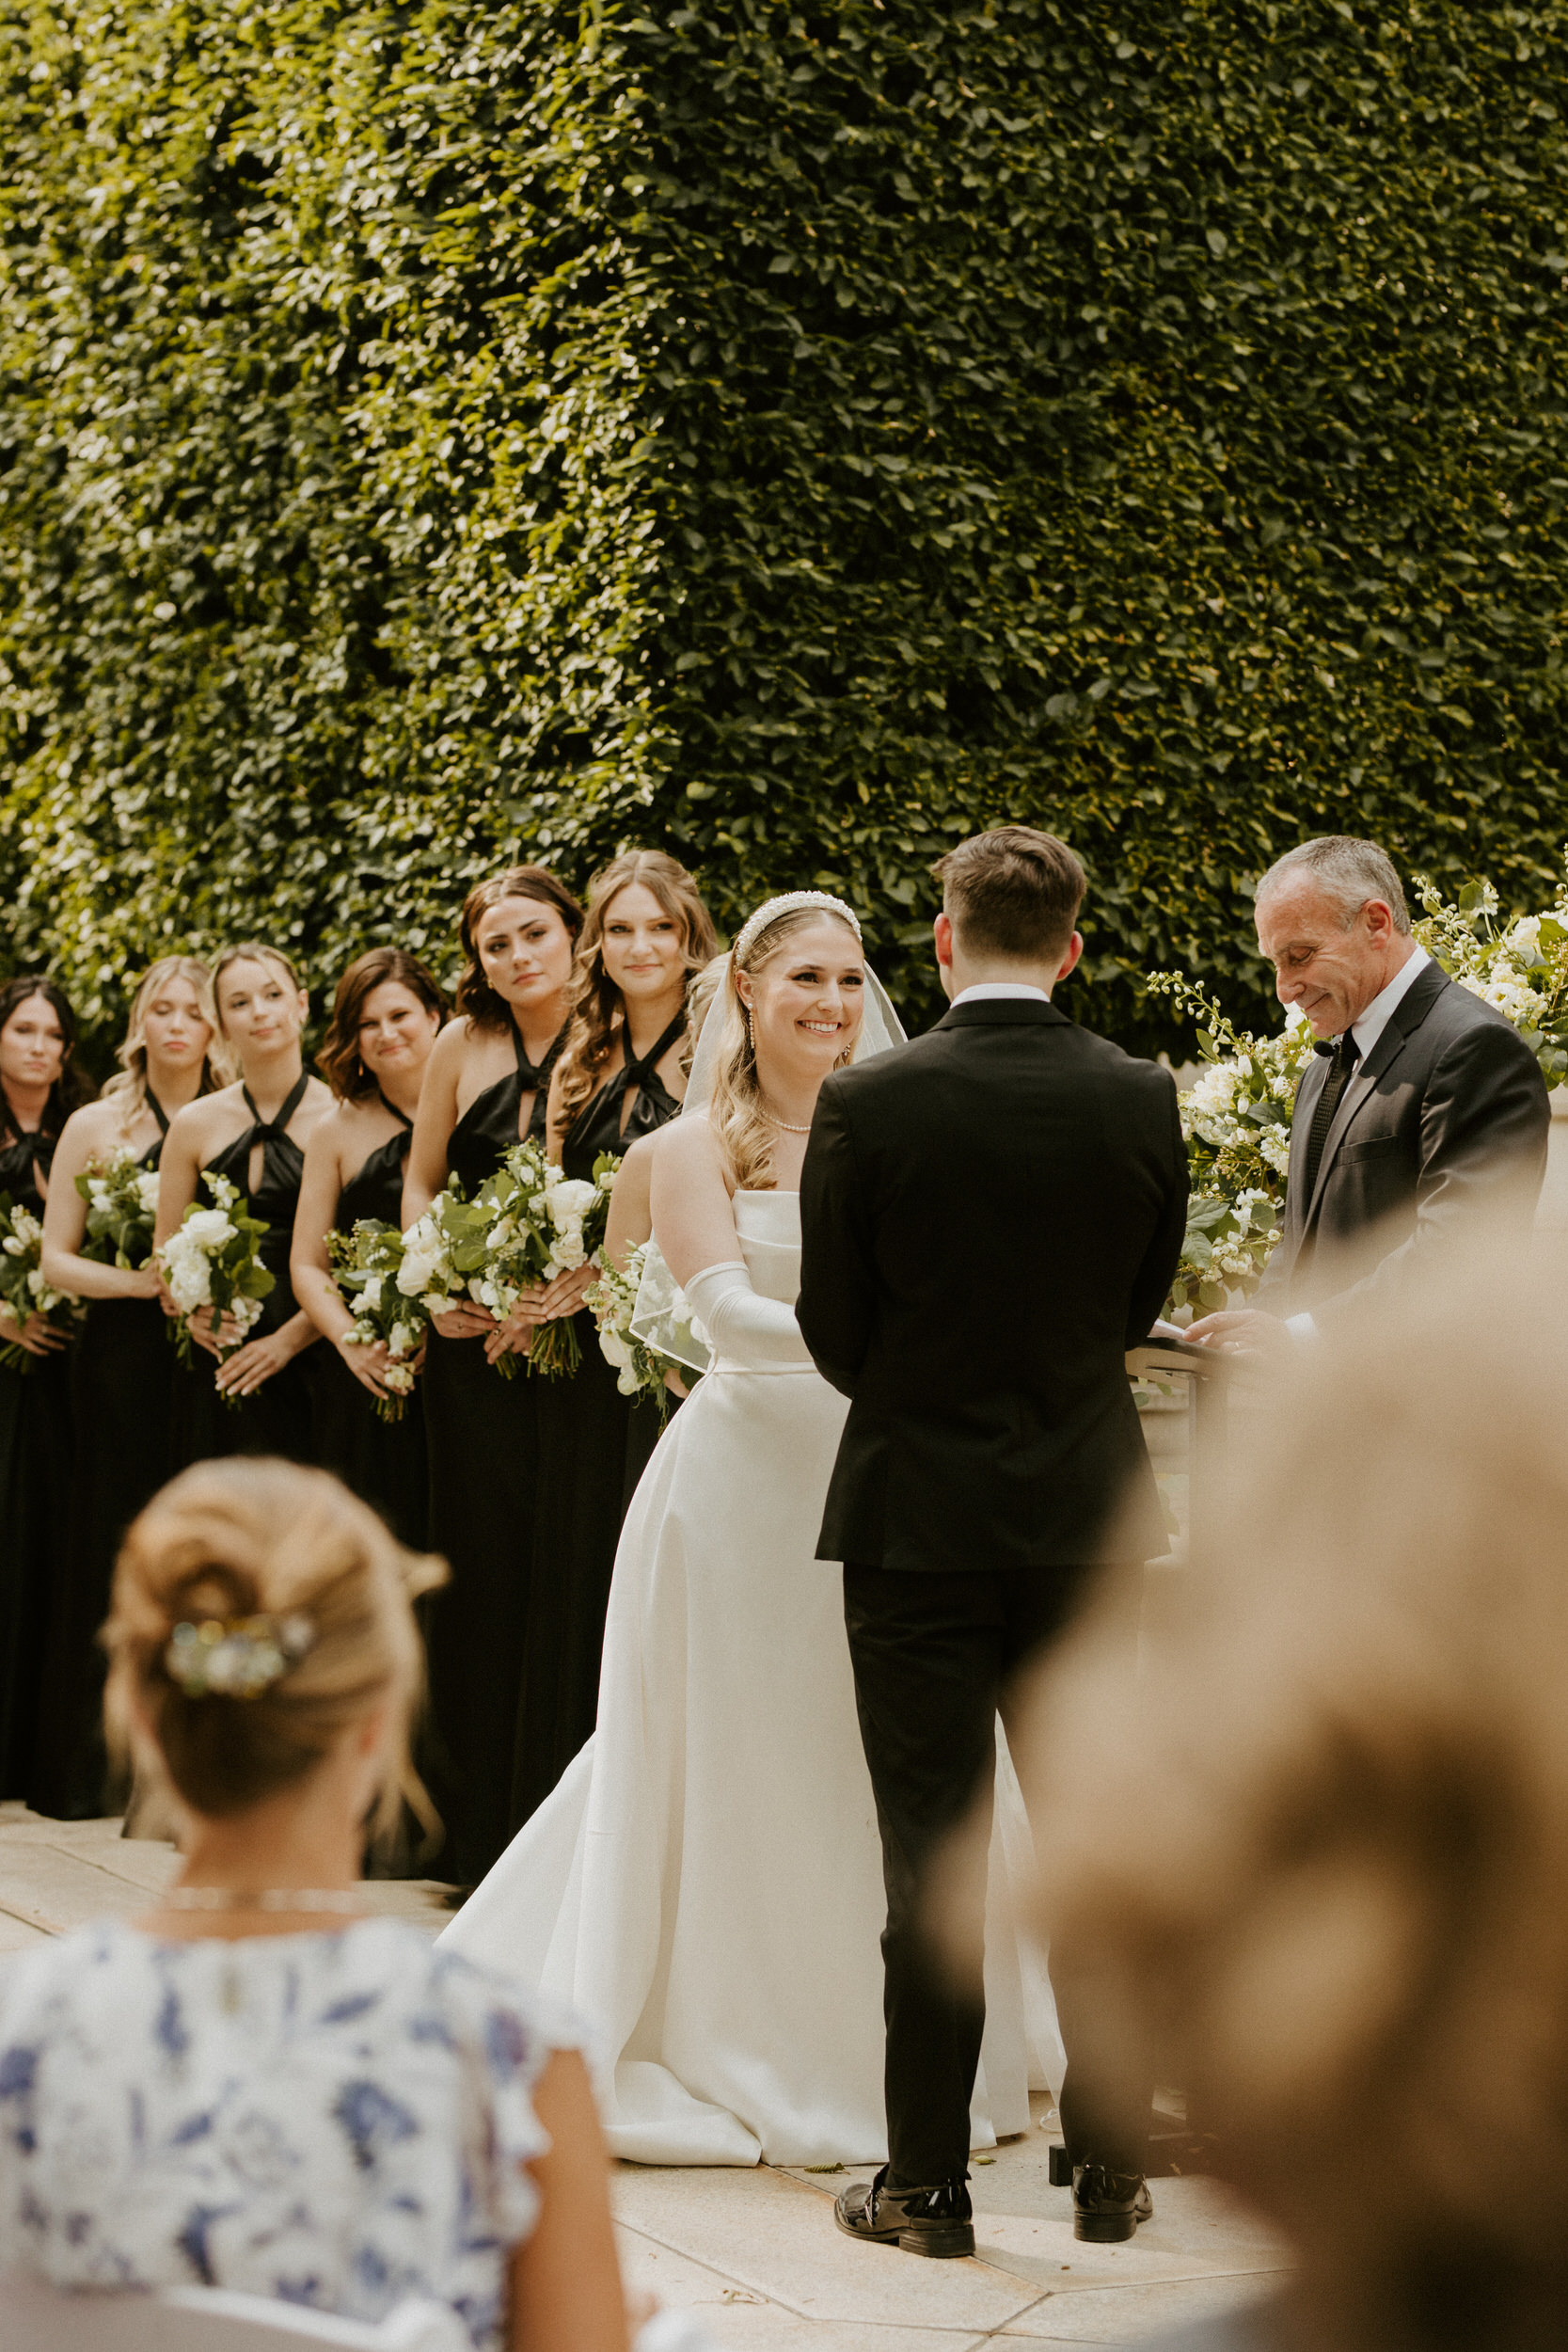 The Frick Pittsburgh Wedding Ceremony